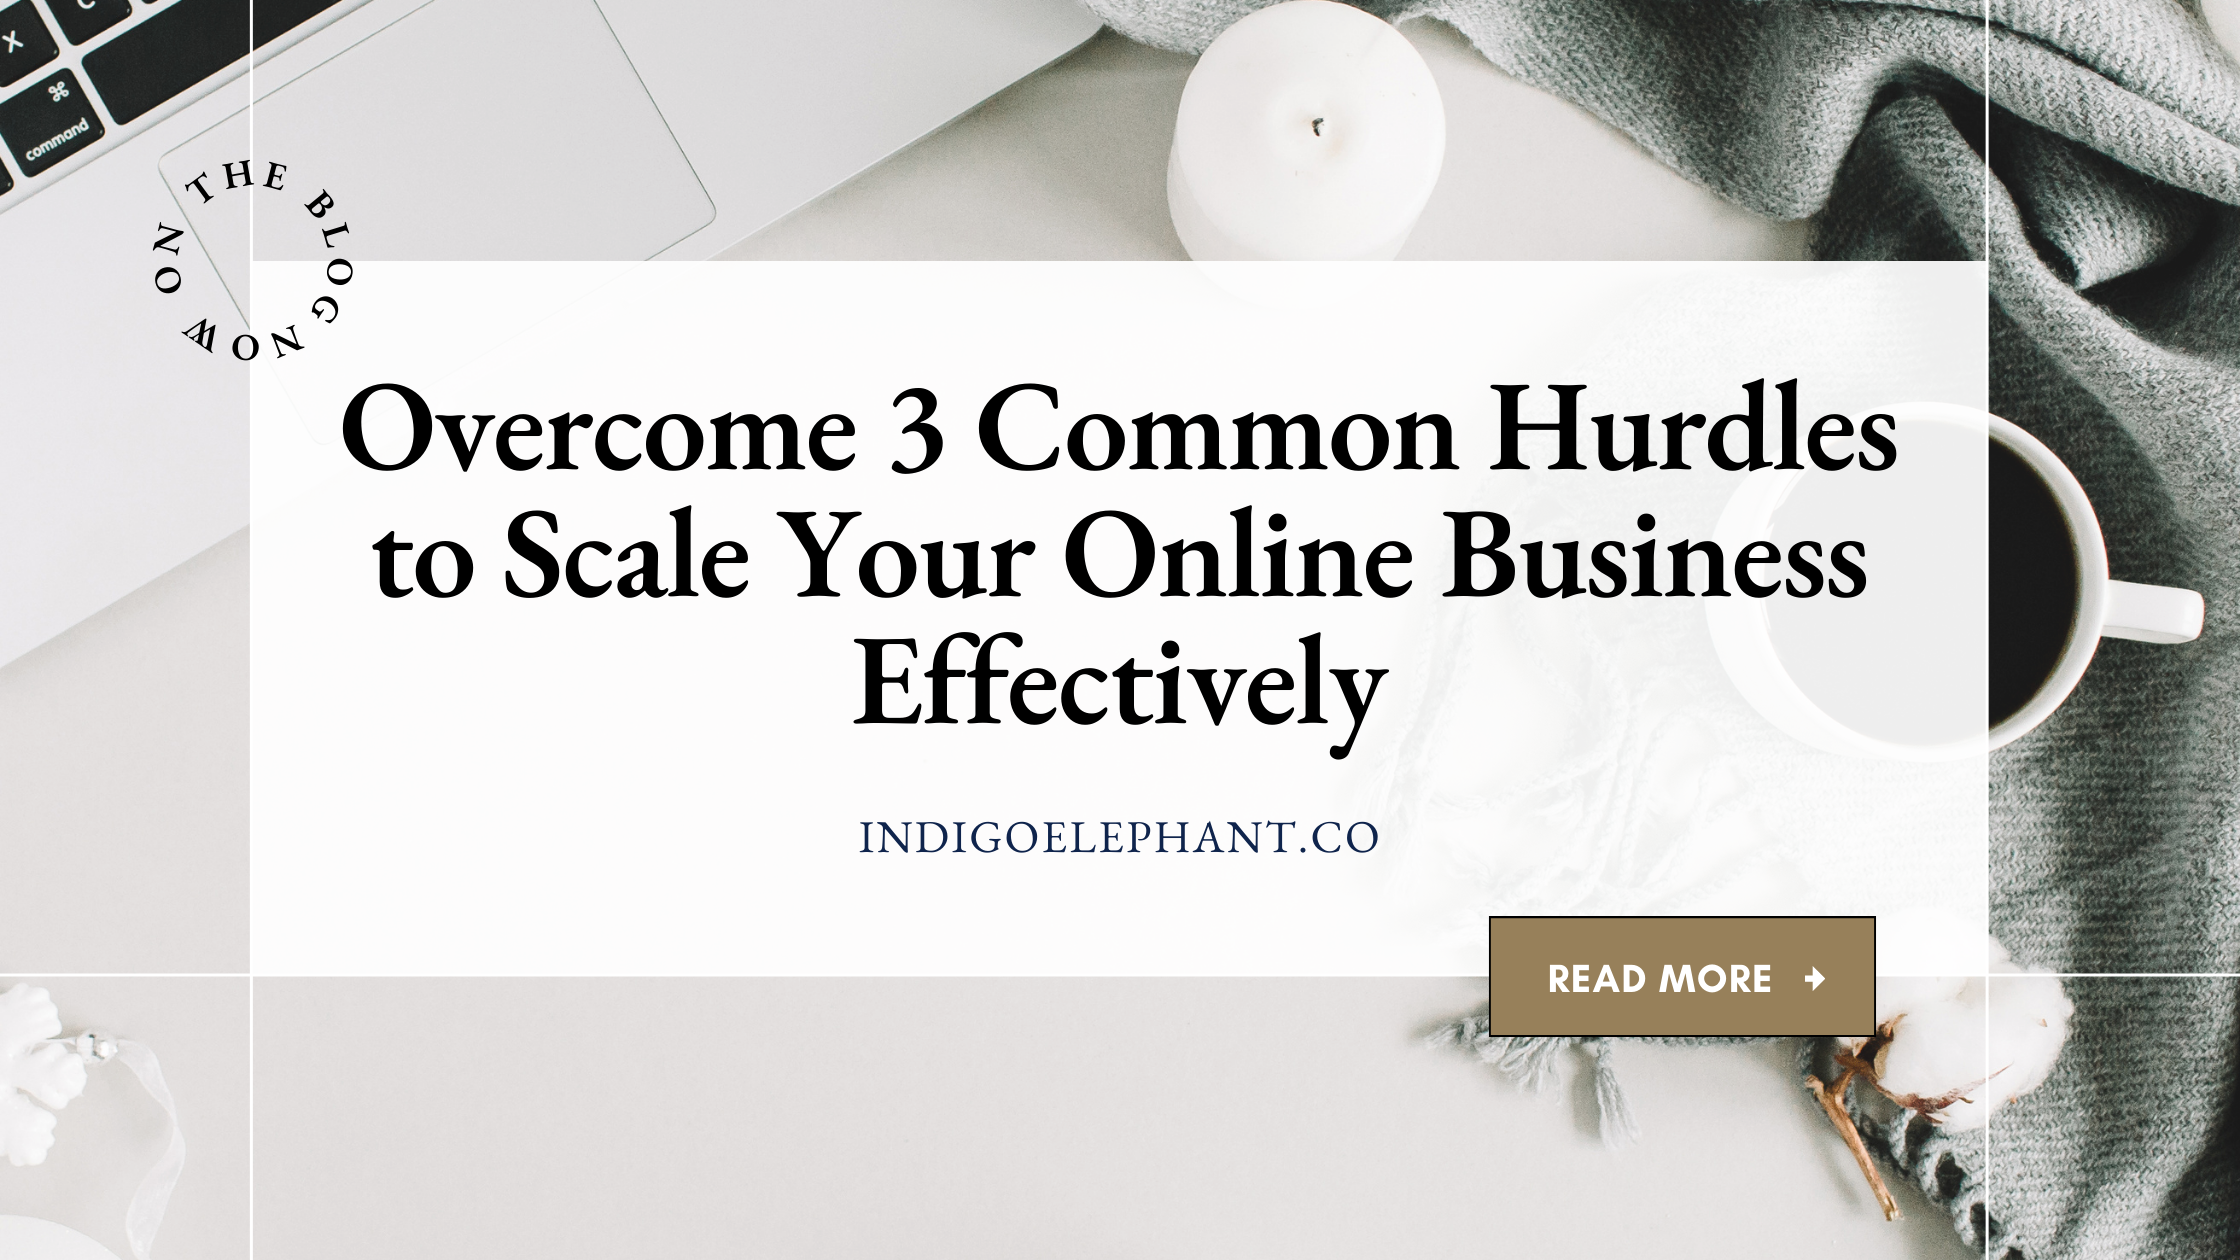 Overcome 3 Common Hurdles to Scale Your Online Business Effectively